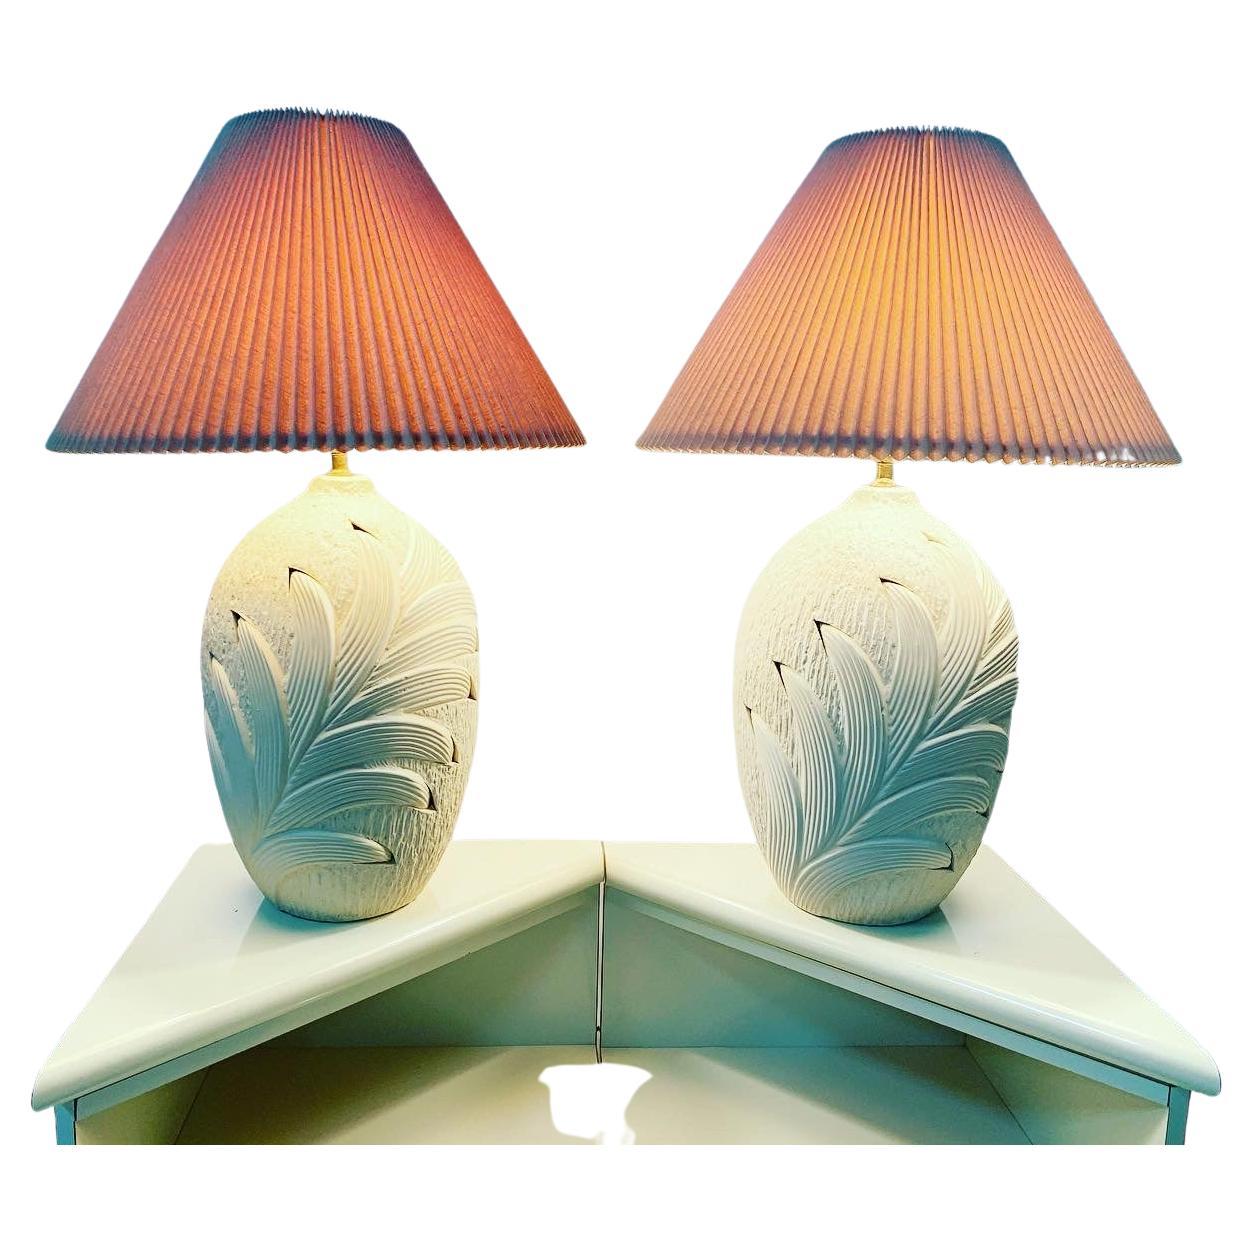 Coastal Style Plaster Palm Frond Leaf Table Lamps - a Pair